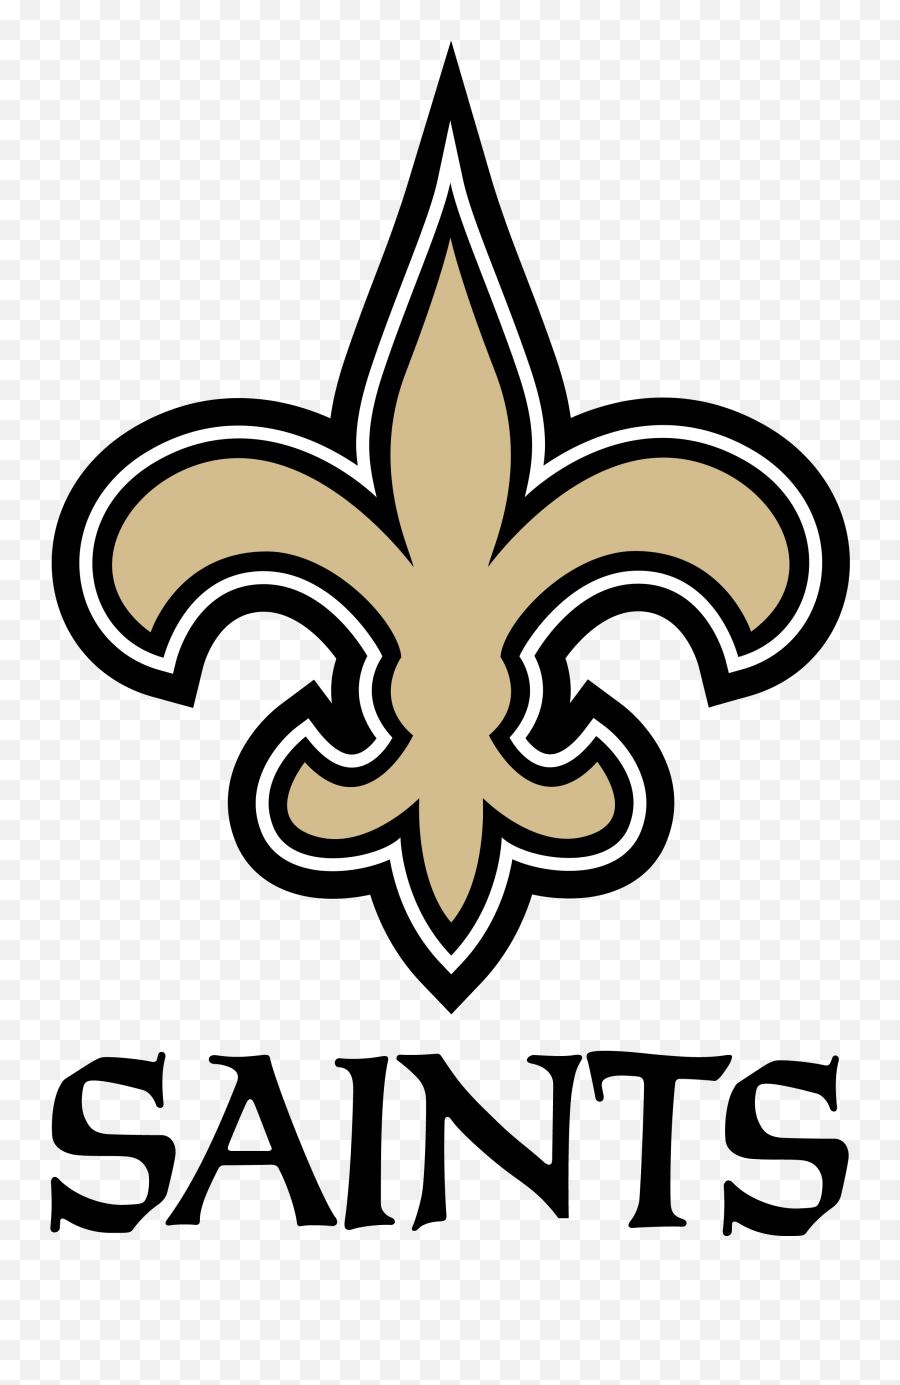 New Orleans Saints Logos History - New Orleans Saints Logo Emoji,Saints Logo